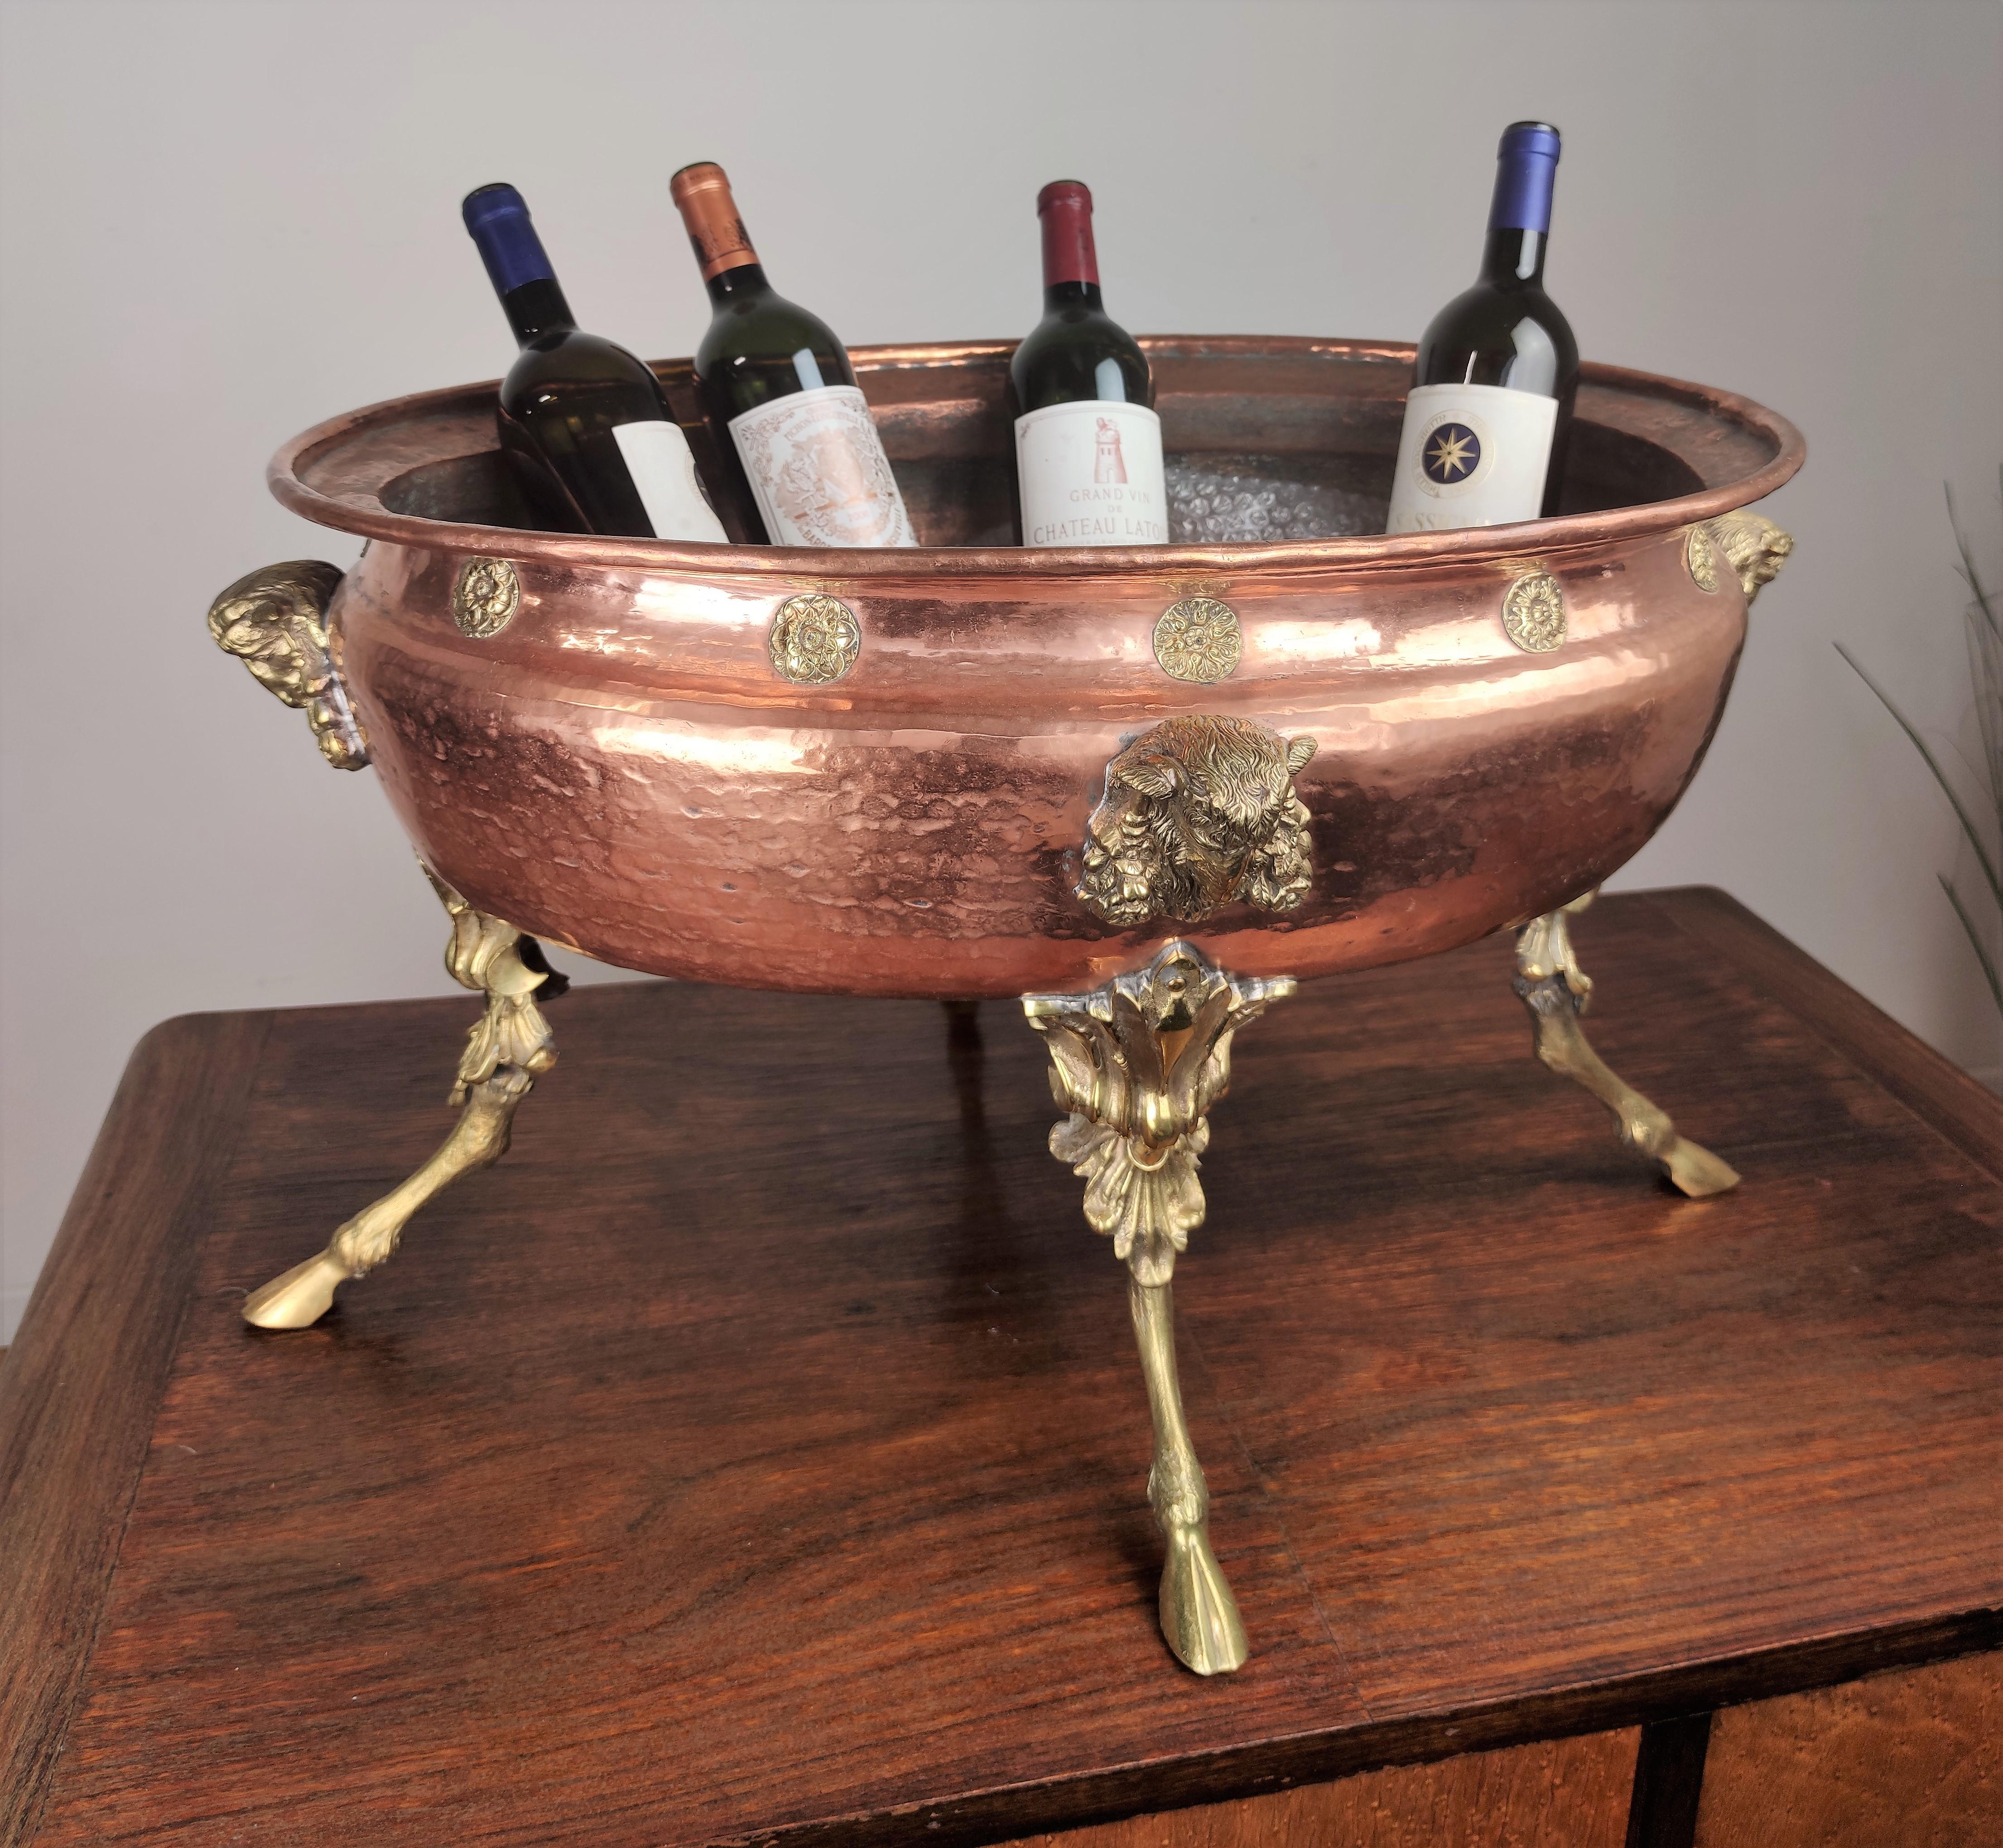 Beautiful, elegant and unique ice holder champagne wine cooler with its large bellied oval copper body fitted with rivet-mounted cast brass decors, figures & handles, and raised upon four carved feet. At the four sides we find four ram's heads